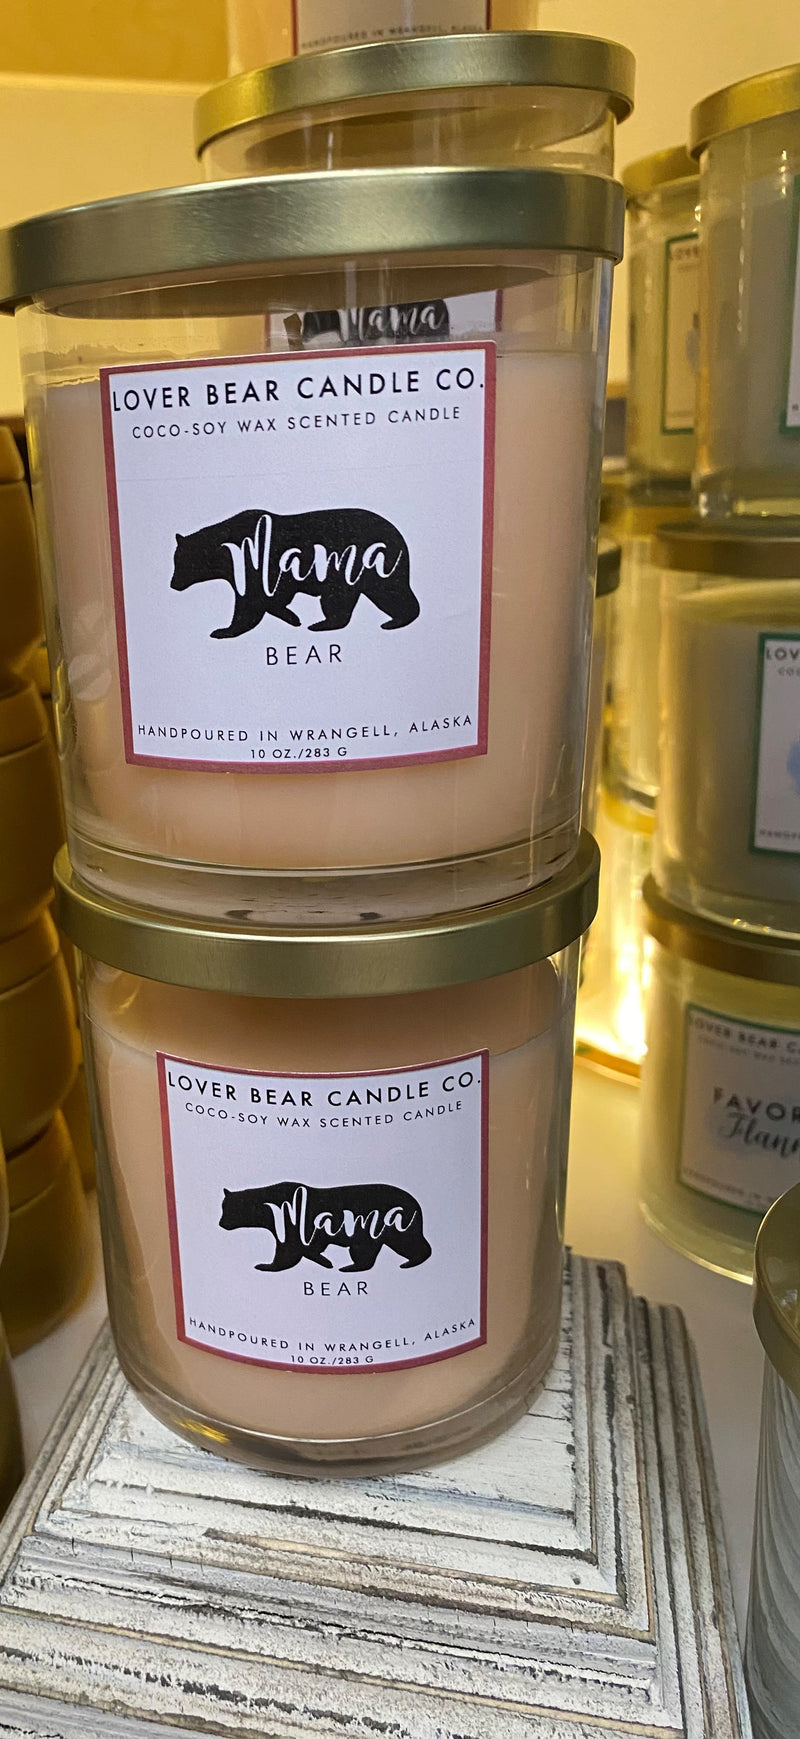 Lover Bear Candles